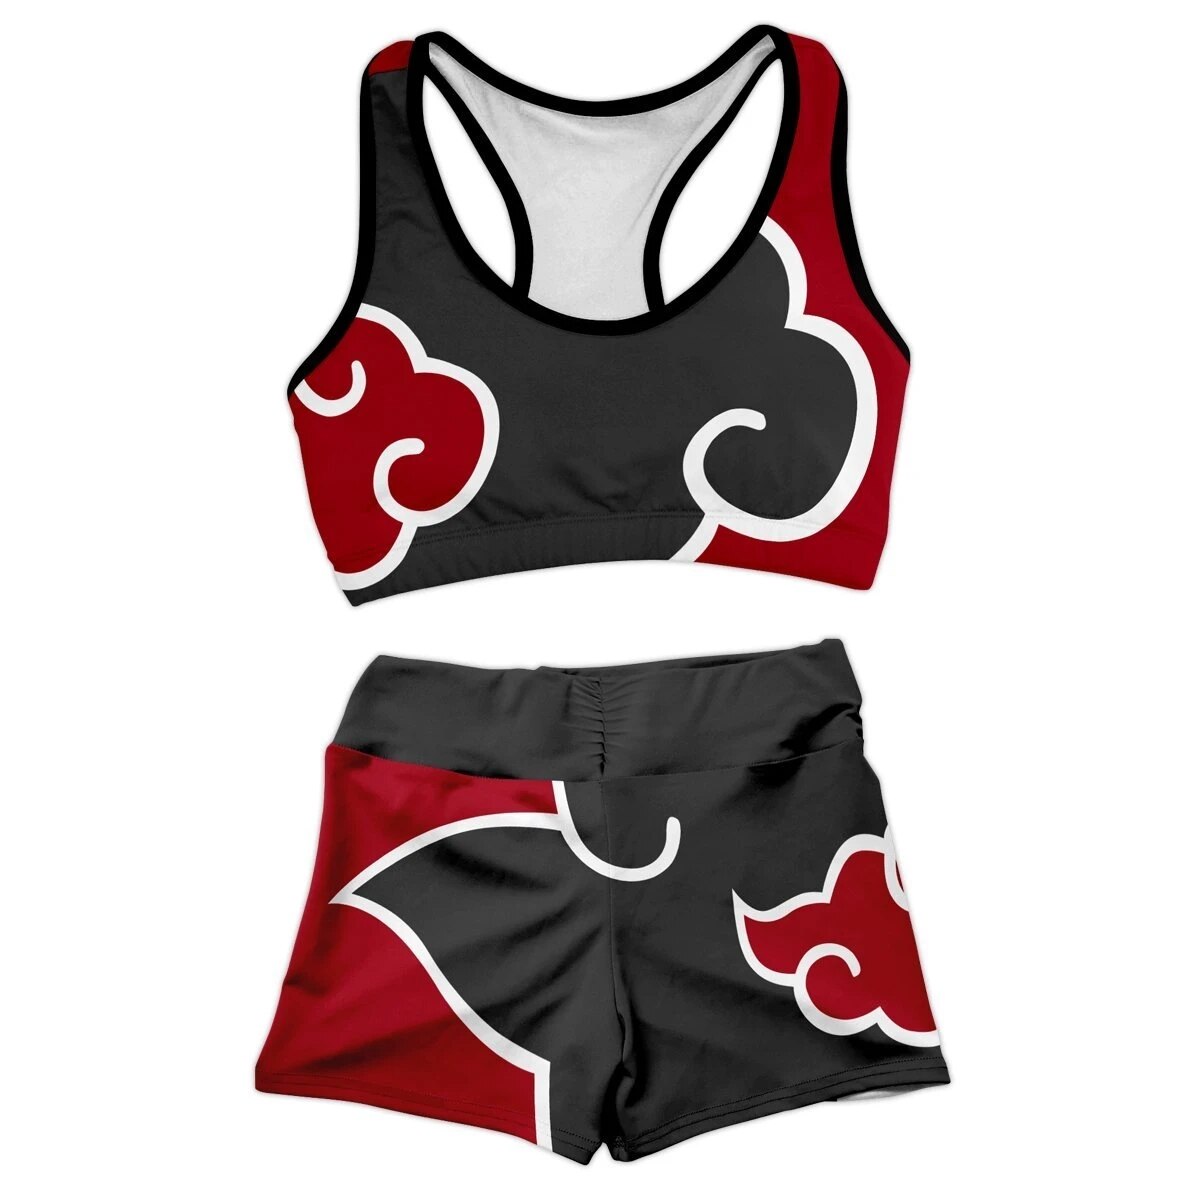 Naruto – Akatsuki Themed Cool Complete Swimsuit (Different Sizes) Pants & Shorts